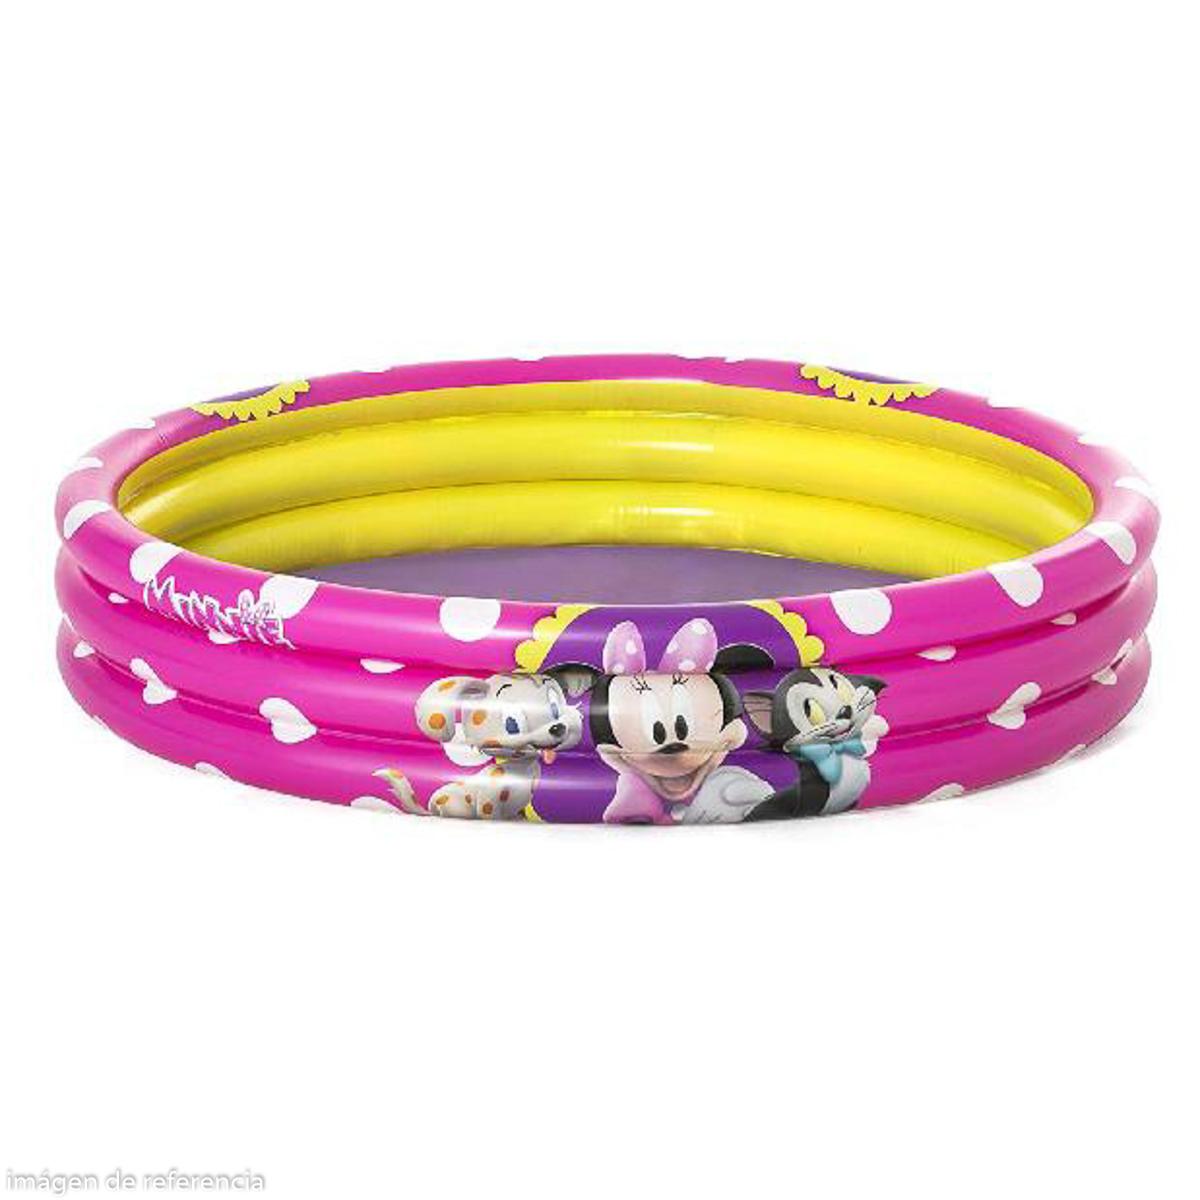 PISCINA INFLABLE MINNIE